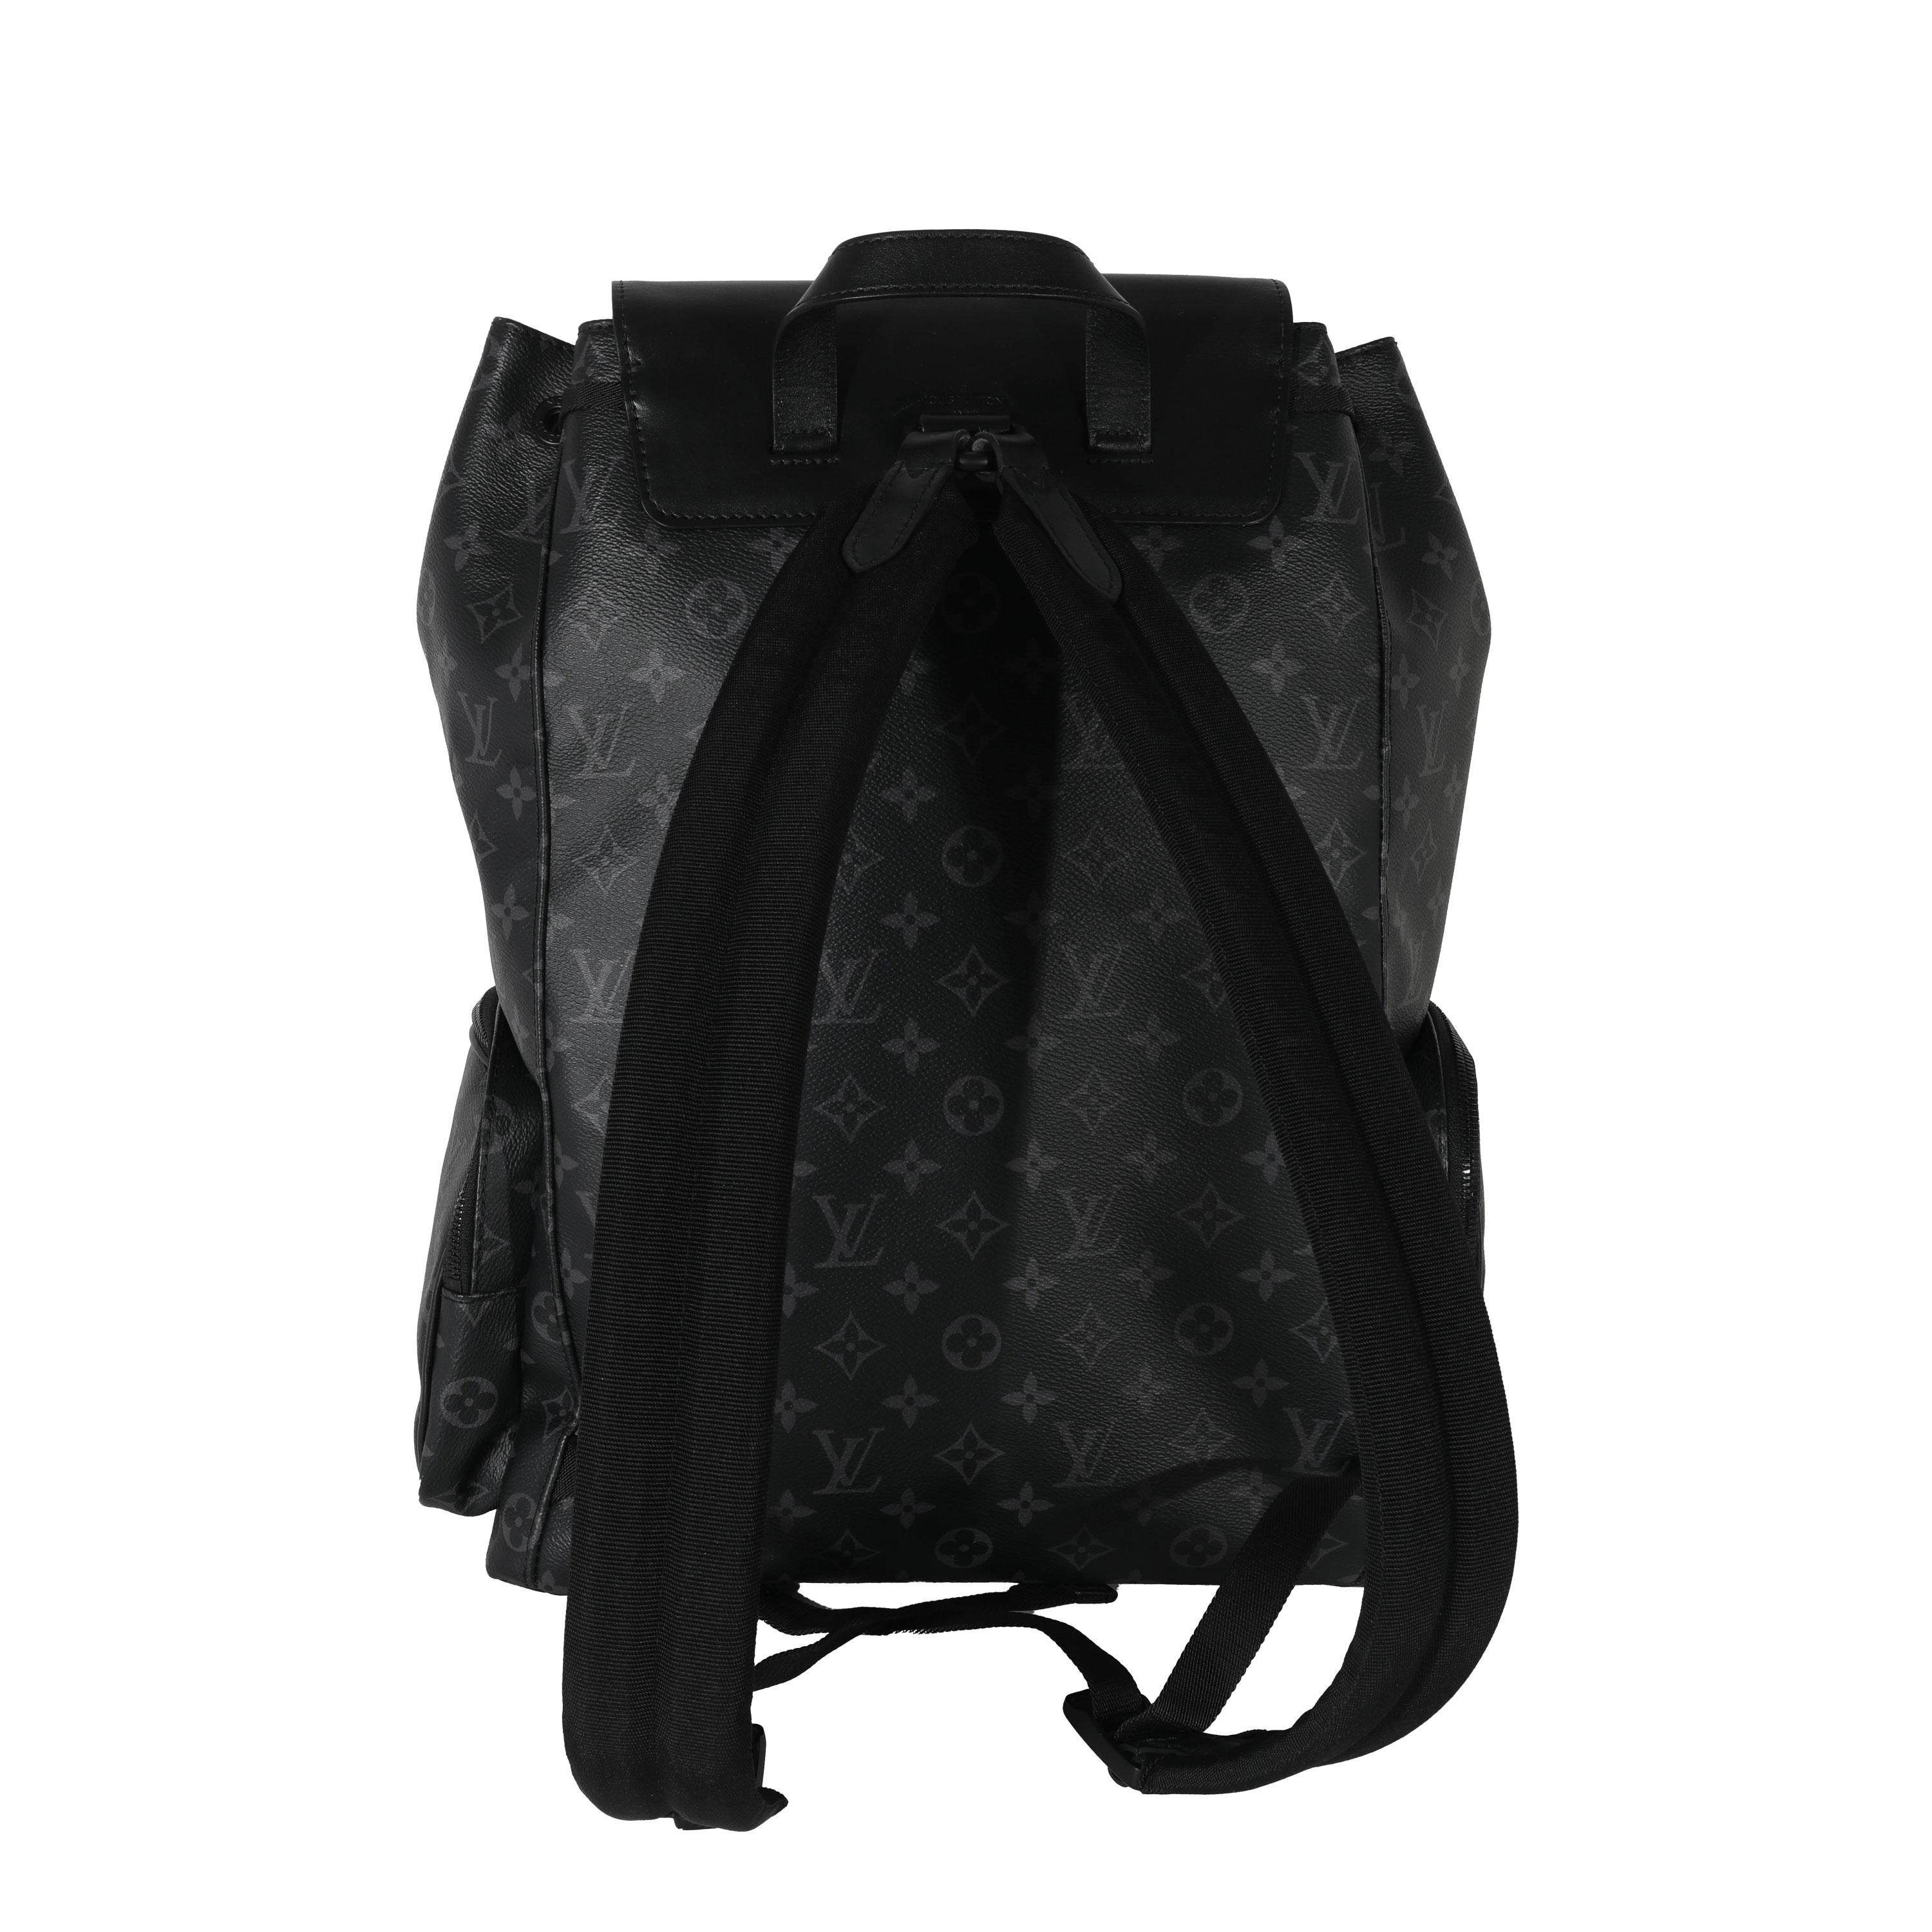 Listing Title: Louis Vuitton Monogram Eclipse Canvas Trio Backpack
SKU: 131435
MSRP: 3850.00
Condition: Pre-owned 
Handbag Condition: Very Good
Condition Comments: Item is in very good condition with minor signs of wear. exterior scuffing and and